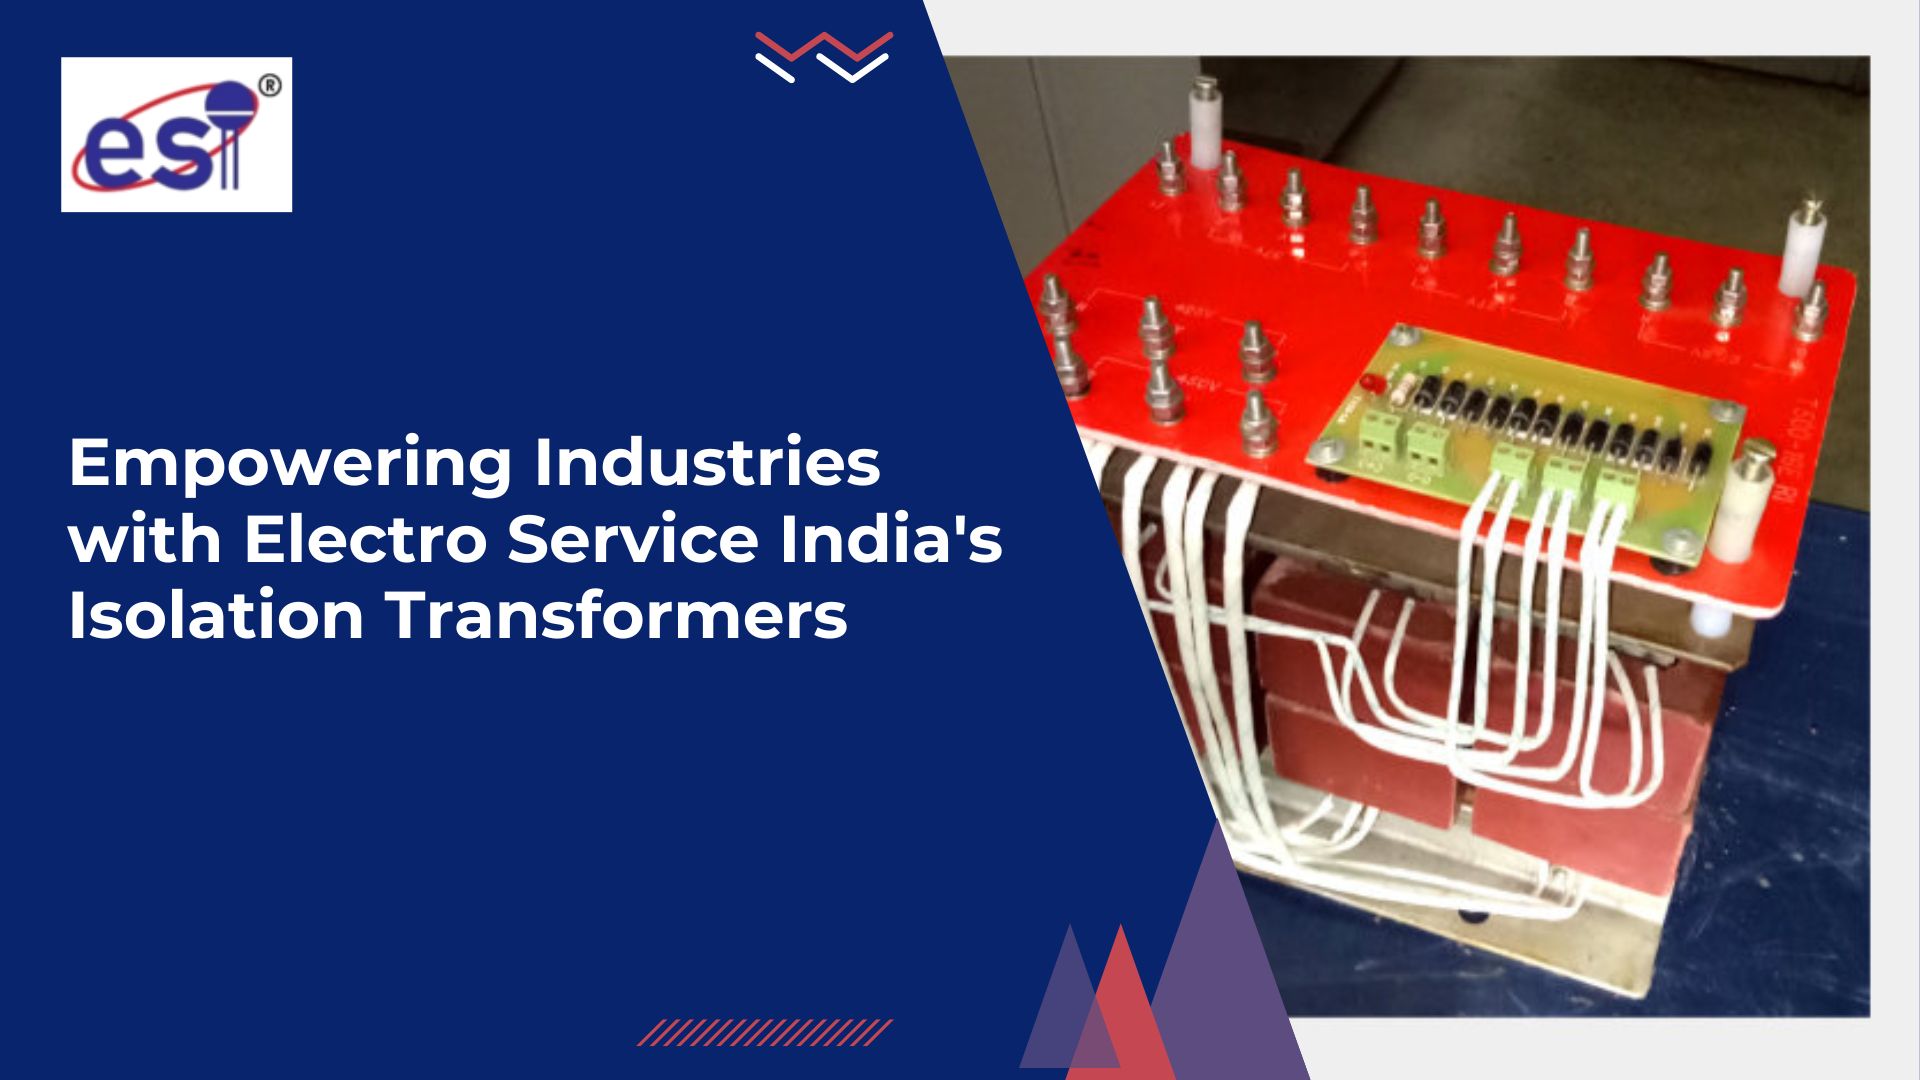 Empowering Industries with Electro Service India's Isolation Transformers